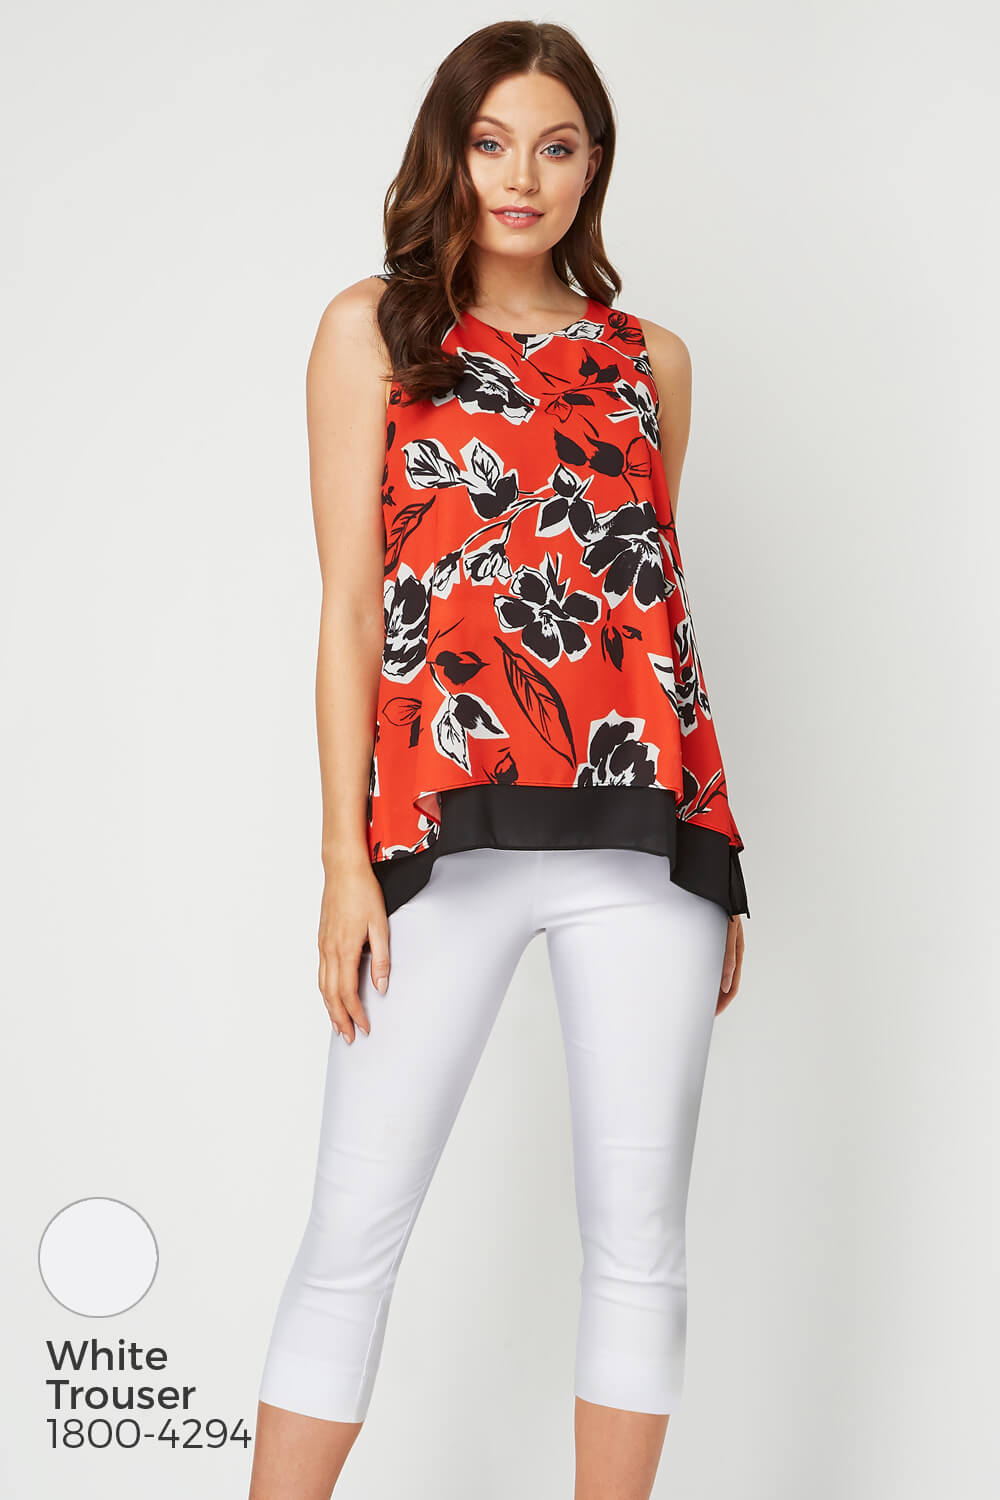 Red Sleeveless Floral Contrast Top, Image 7 of 8